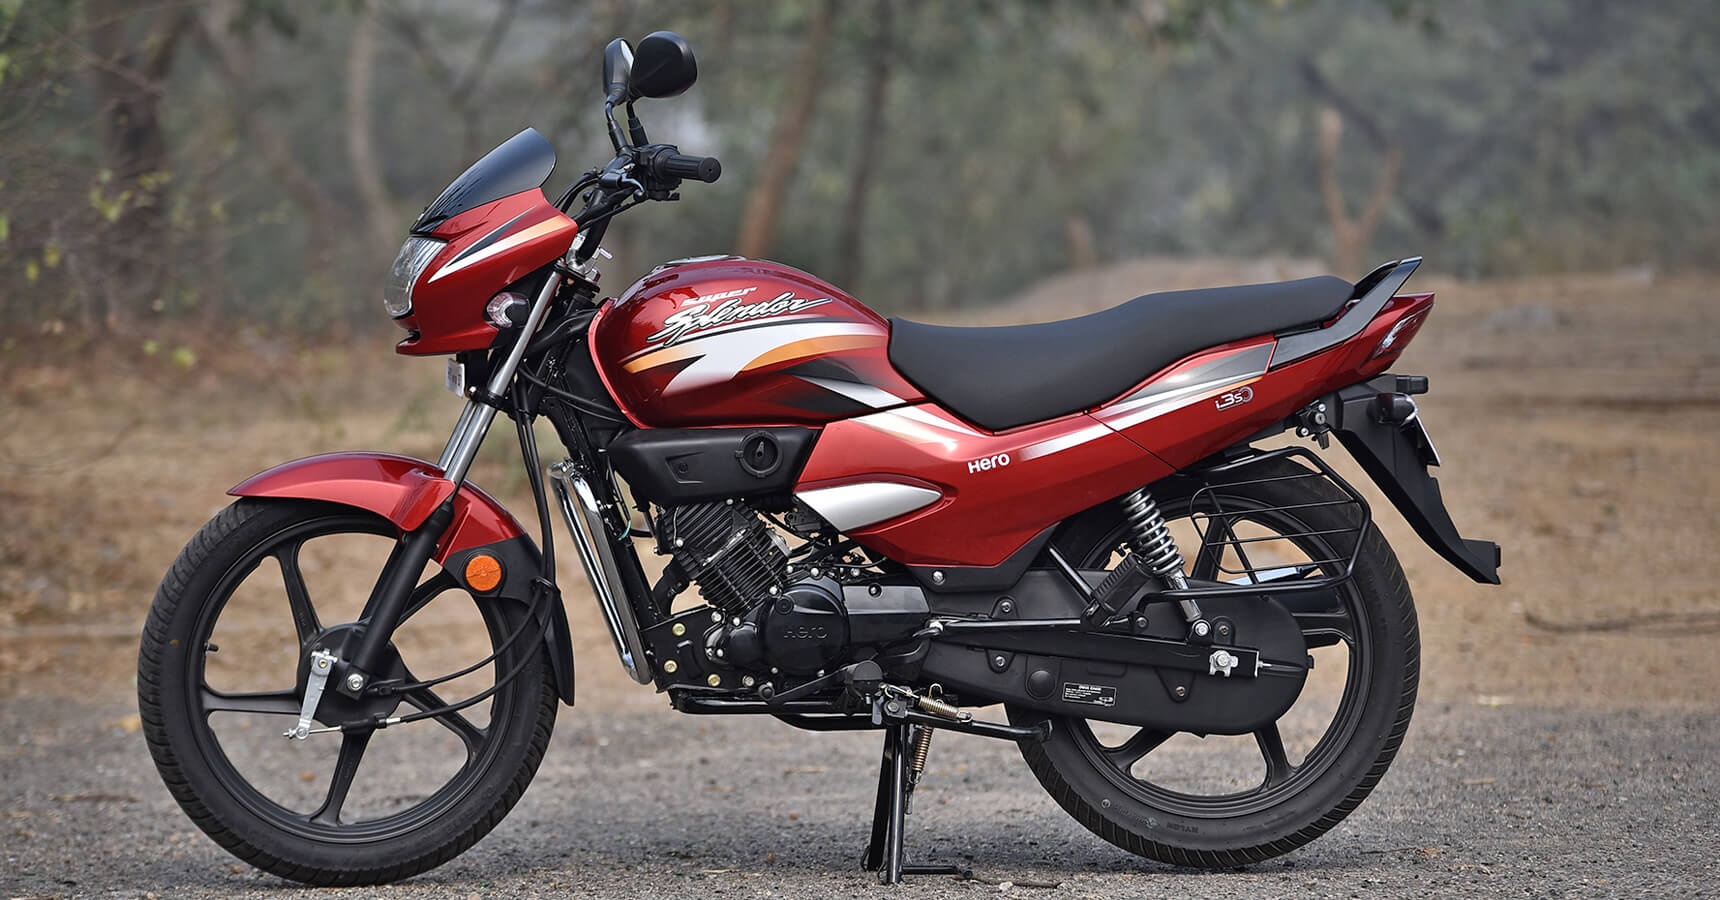 Hero MotoCorp sold 3.94 lakh Bikes & Scooters